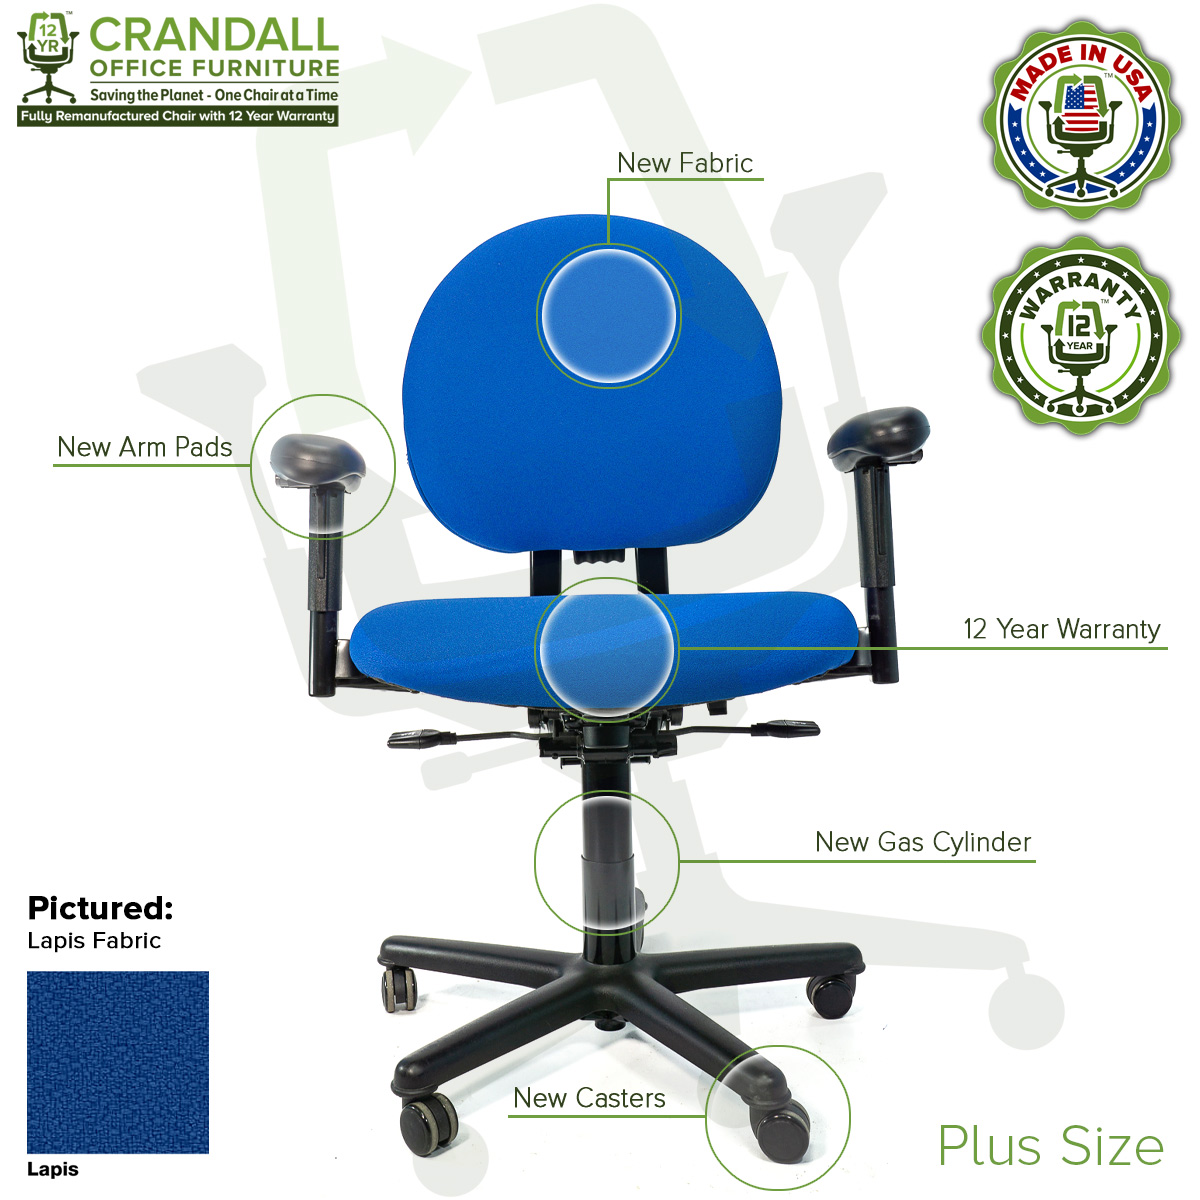 Crandall Office Furniture Remanufactured Steelcase Criterion Plus Chair with 12 Year Warranty - 06